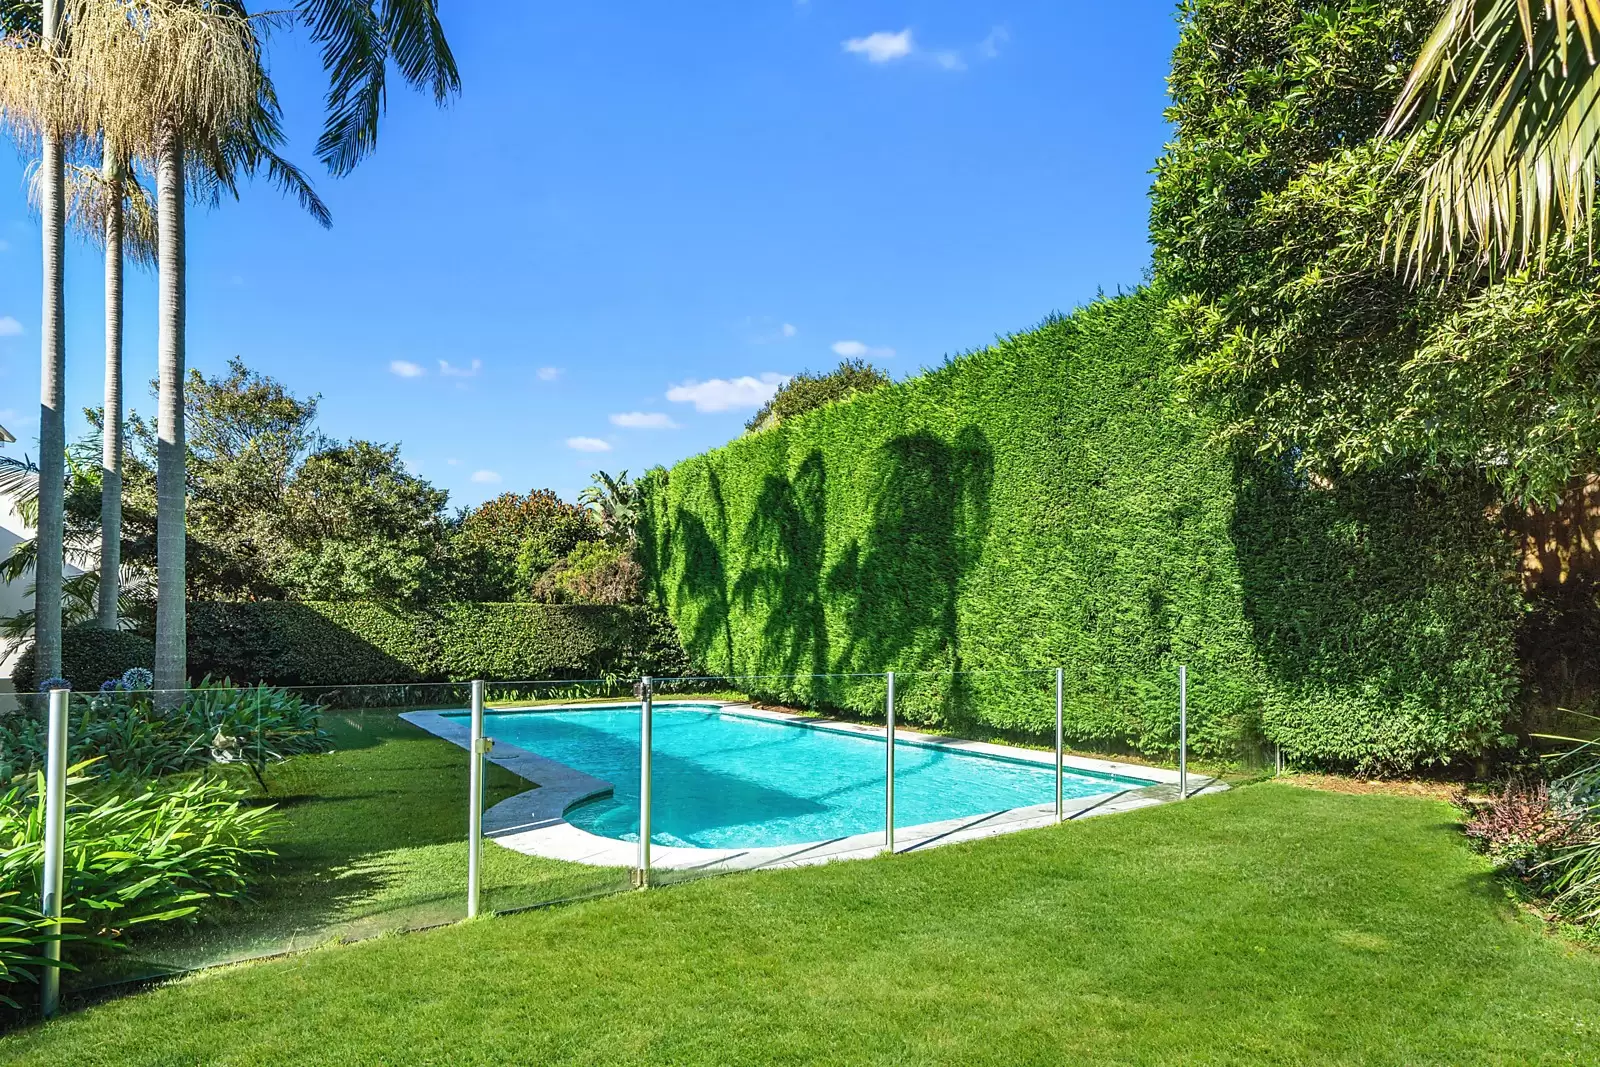 33 Olphert Avenue, Vaucluse Sold by Sydney Sotheby's International Realty - image 1